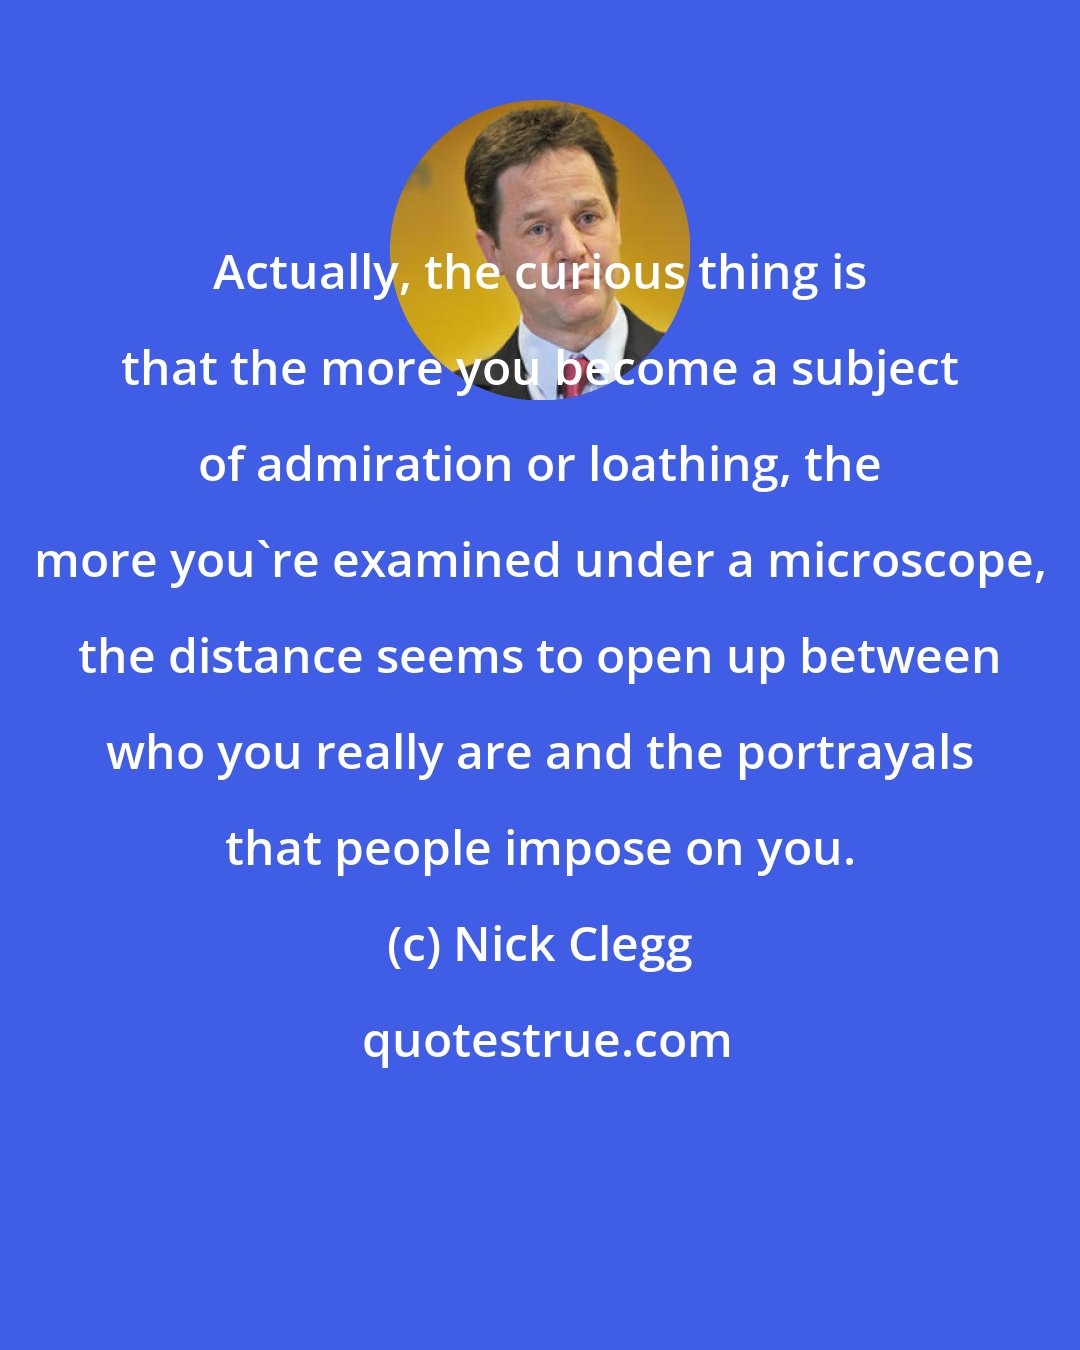 Nick Clegg: Actually, the curious thing is that the more you become a subject of admiration or loathing, the more you're examined under a microscope, the distance seems to open up between who you really are and the portrayals that people impose on you.